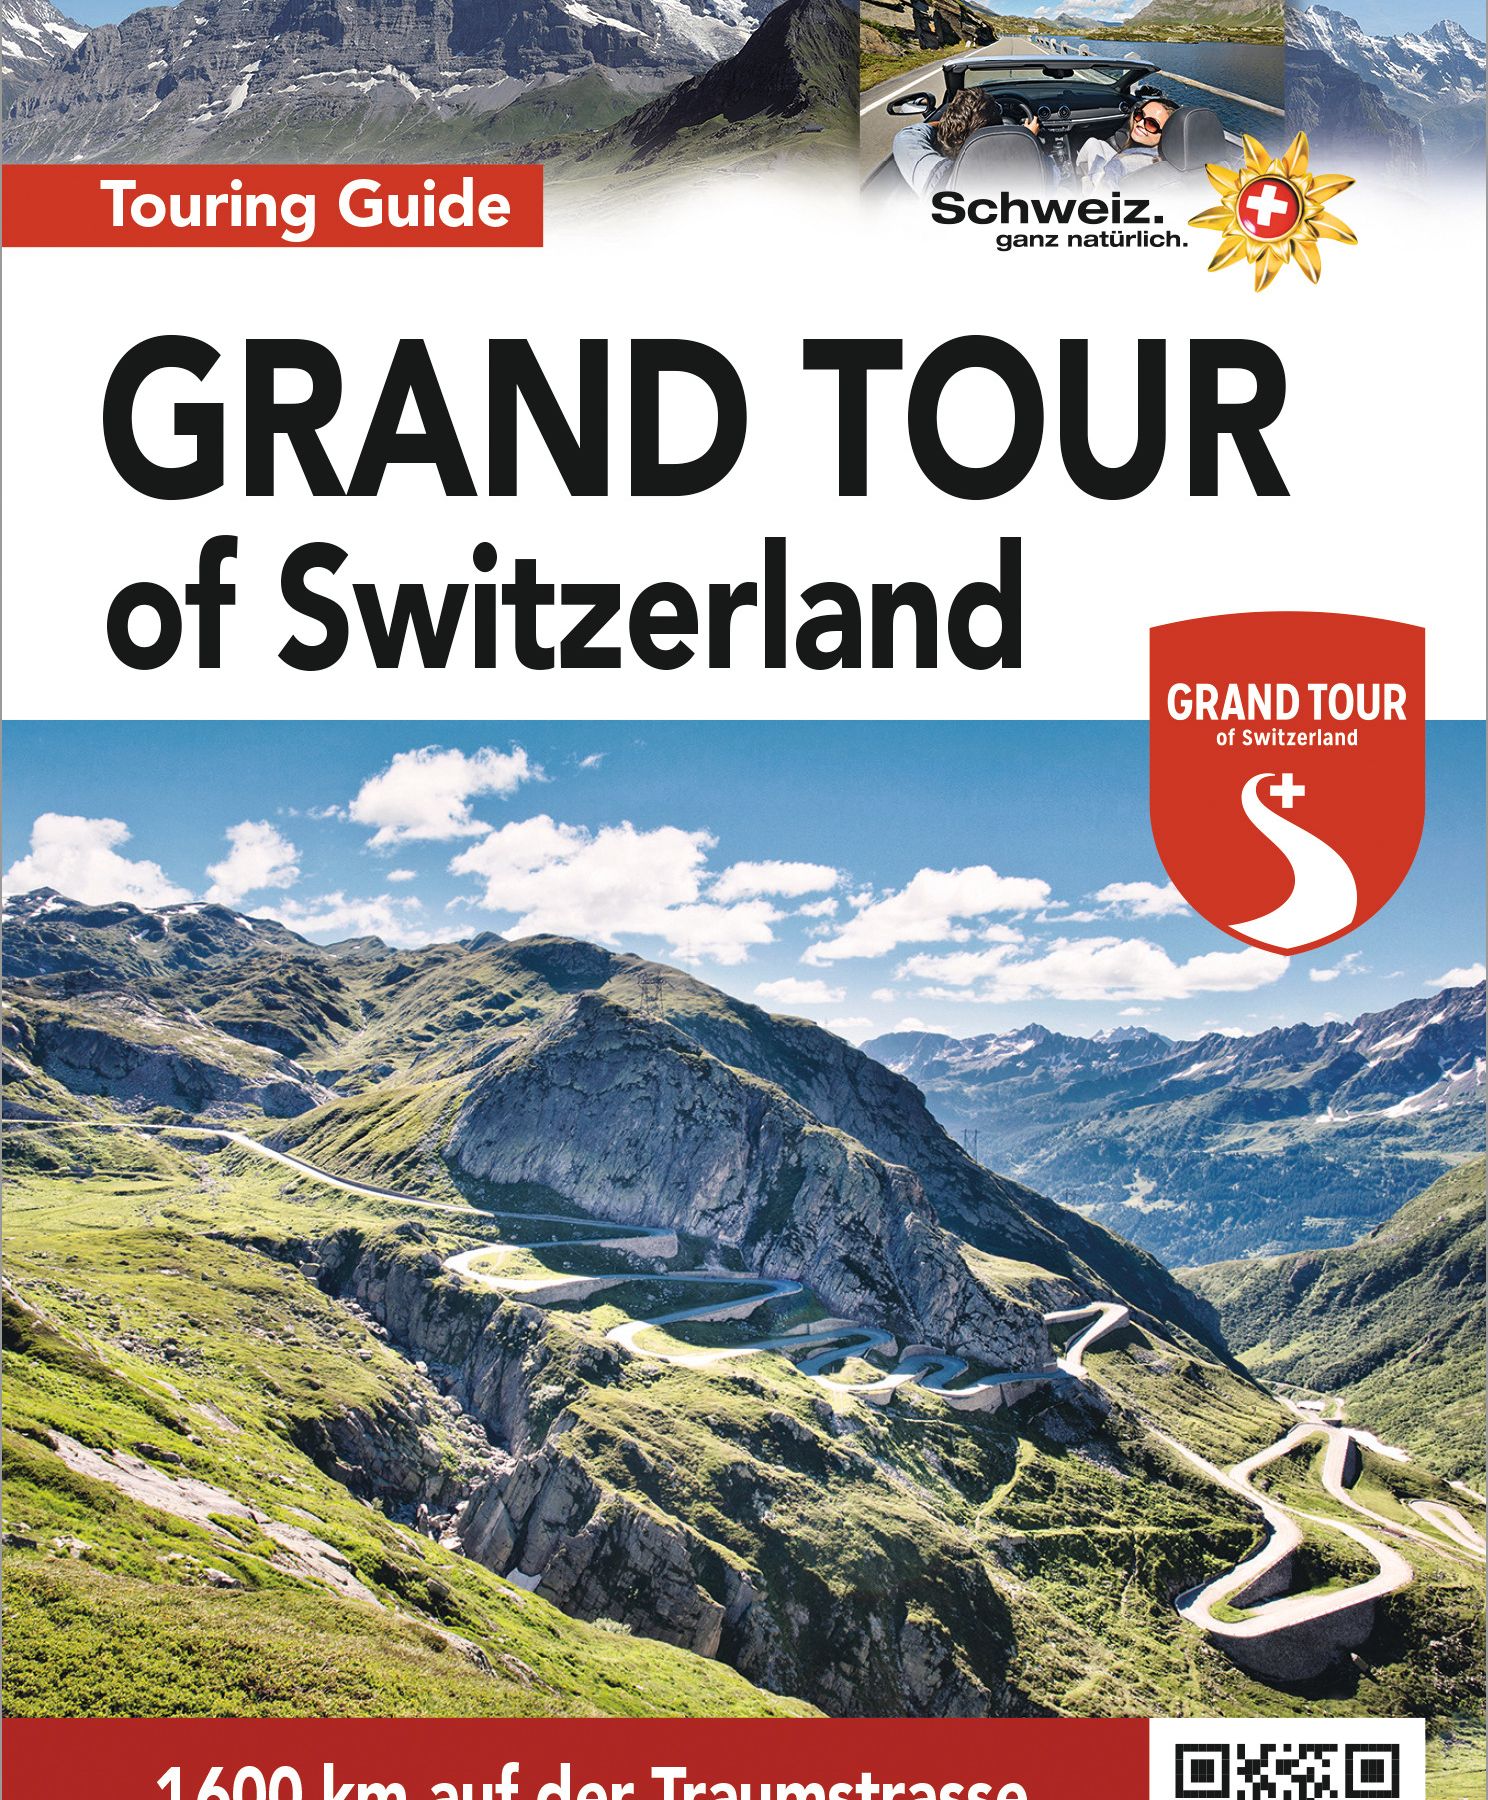 The Touring Map and Guide for Grand Tour of Switzerland Switzerland